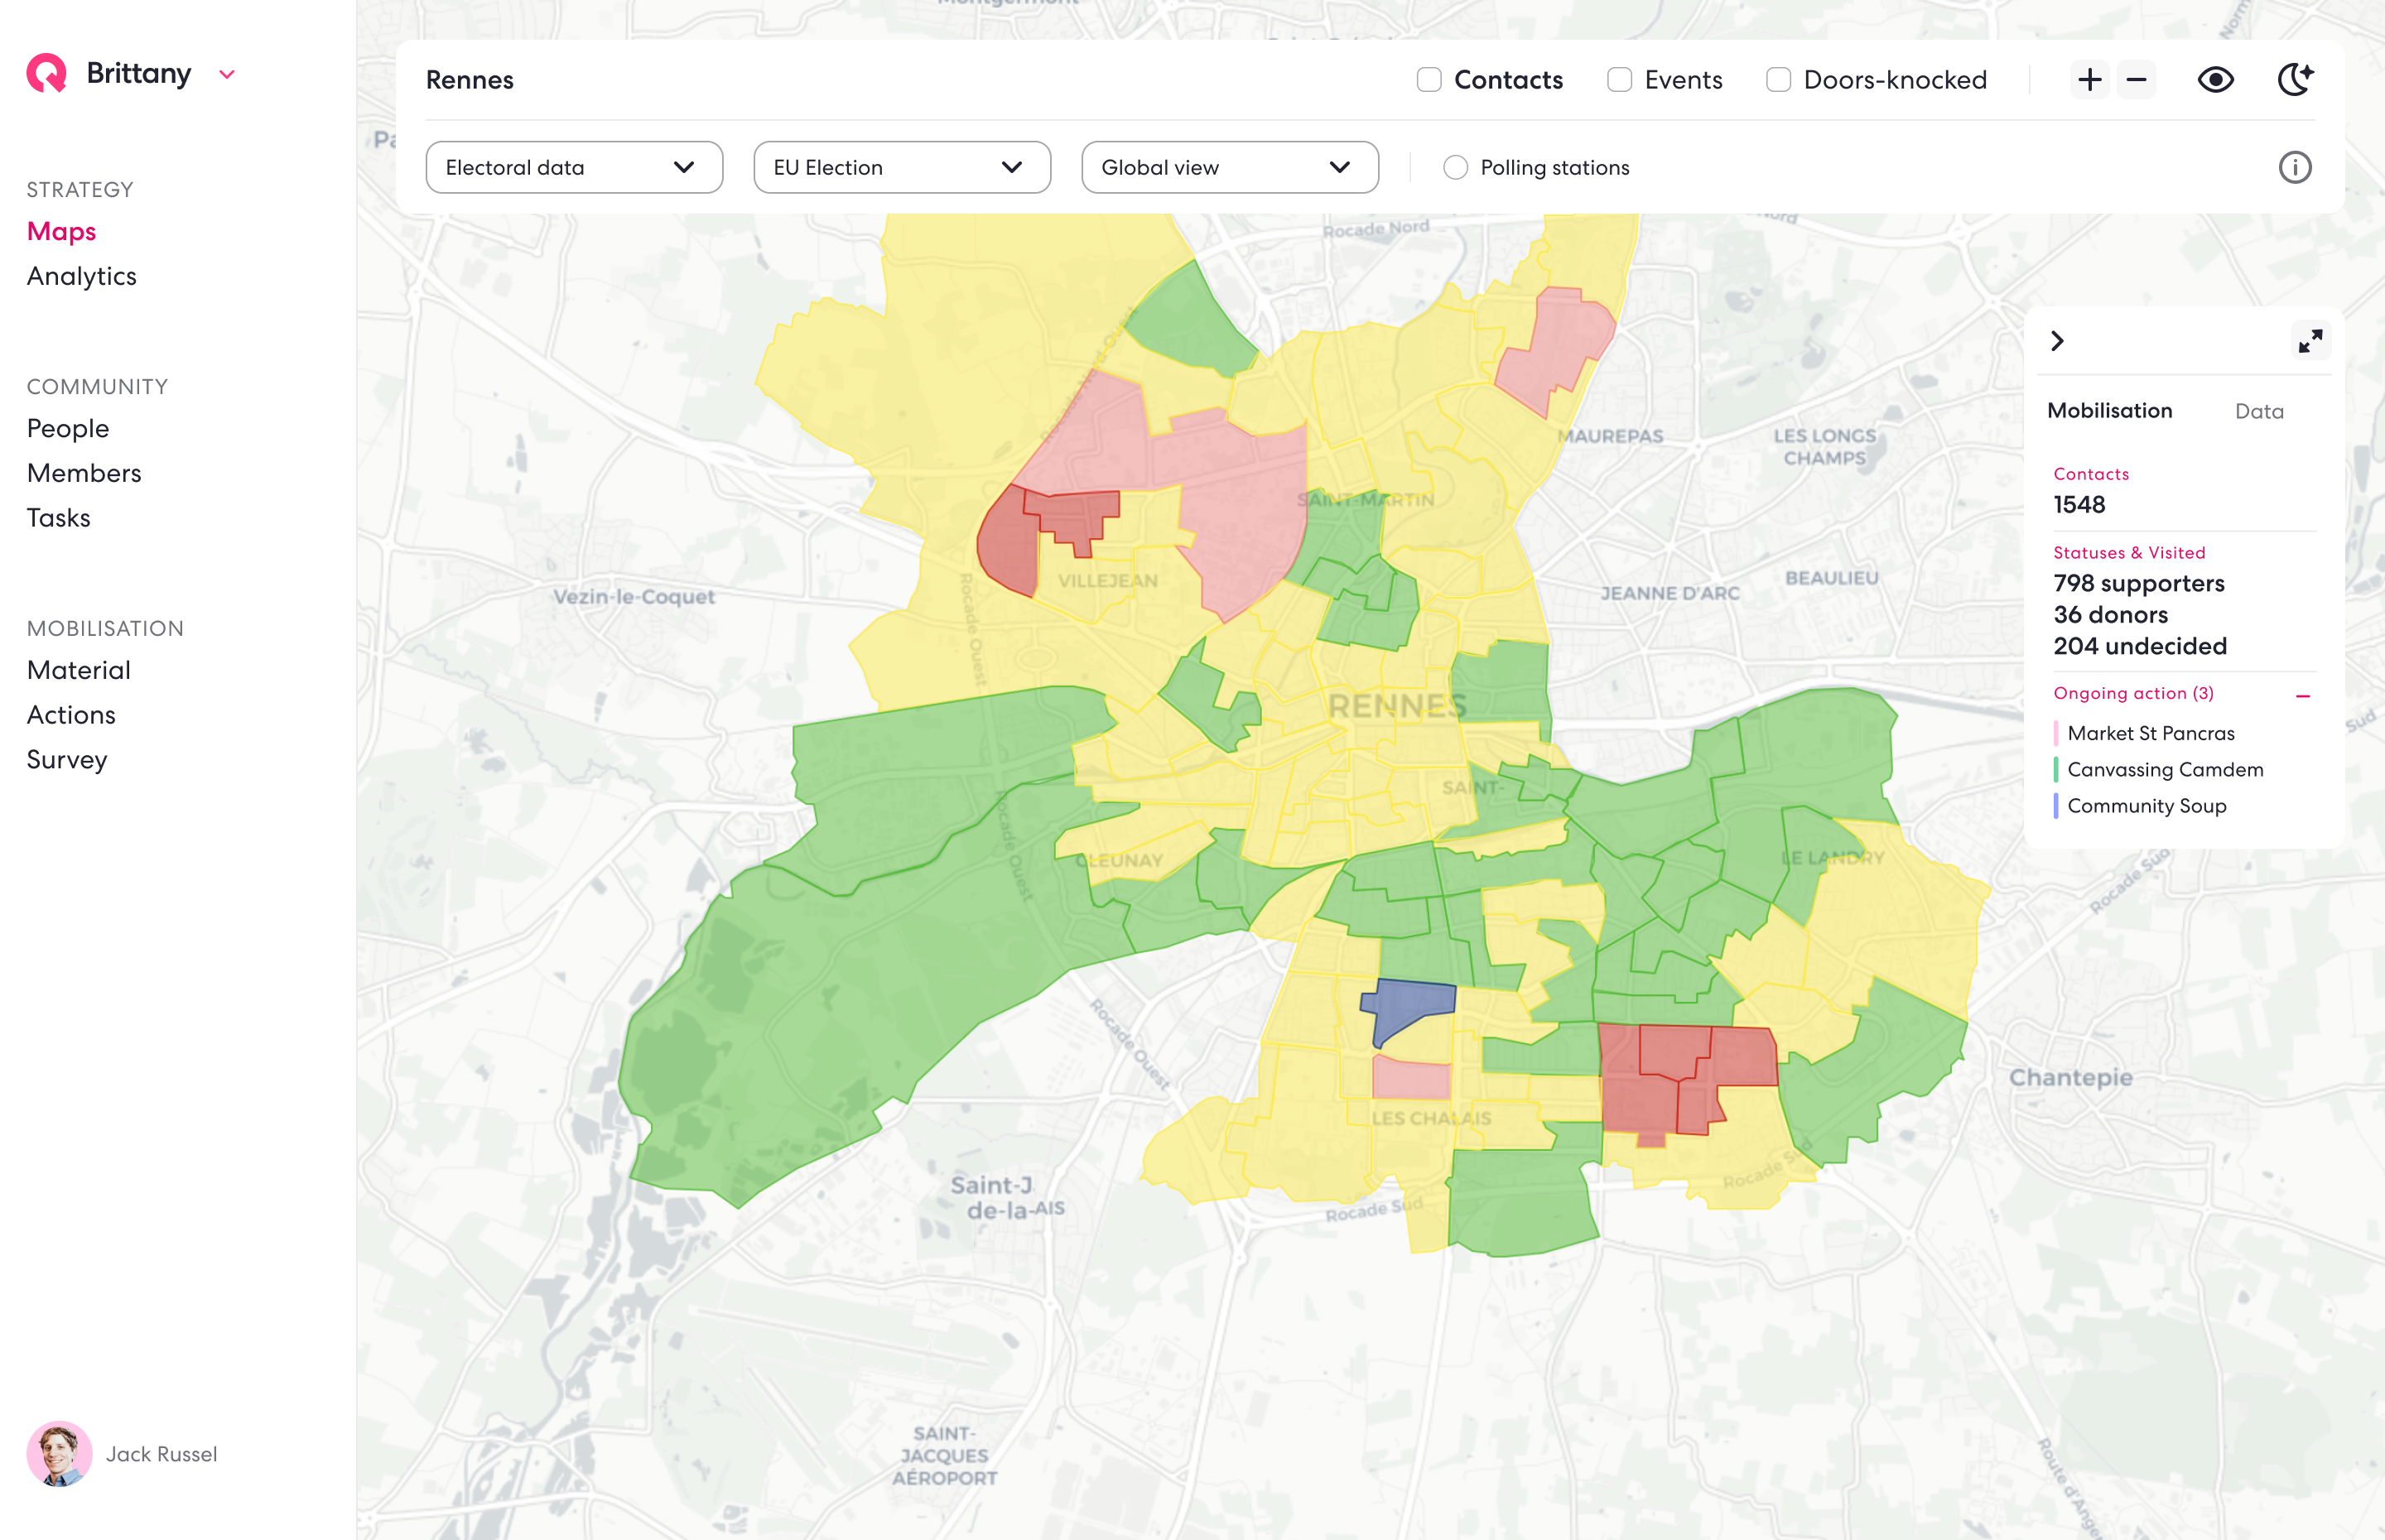 Profiles Data. Analyze data (upstream or downstream) by territory on the map. Analyse the most relevant profiles and points of interest in each area to meet your goals. Be able to access electoral or socio-economic data on the map.